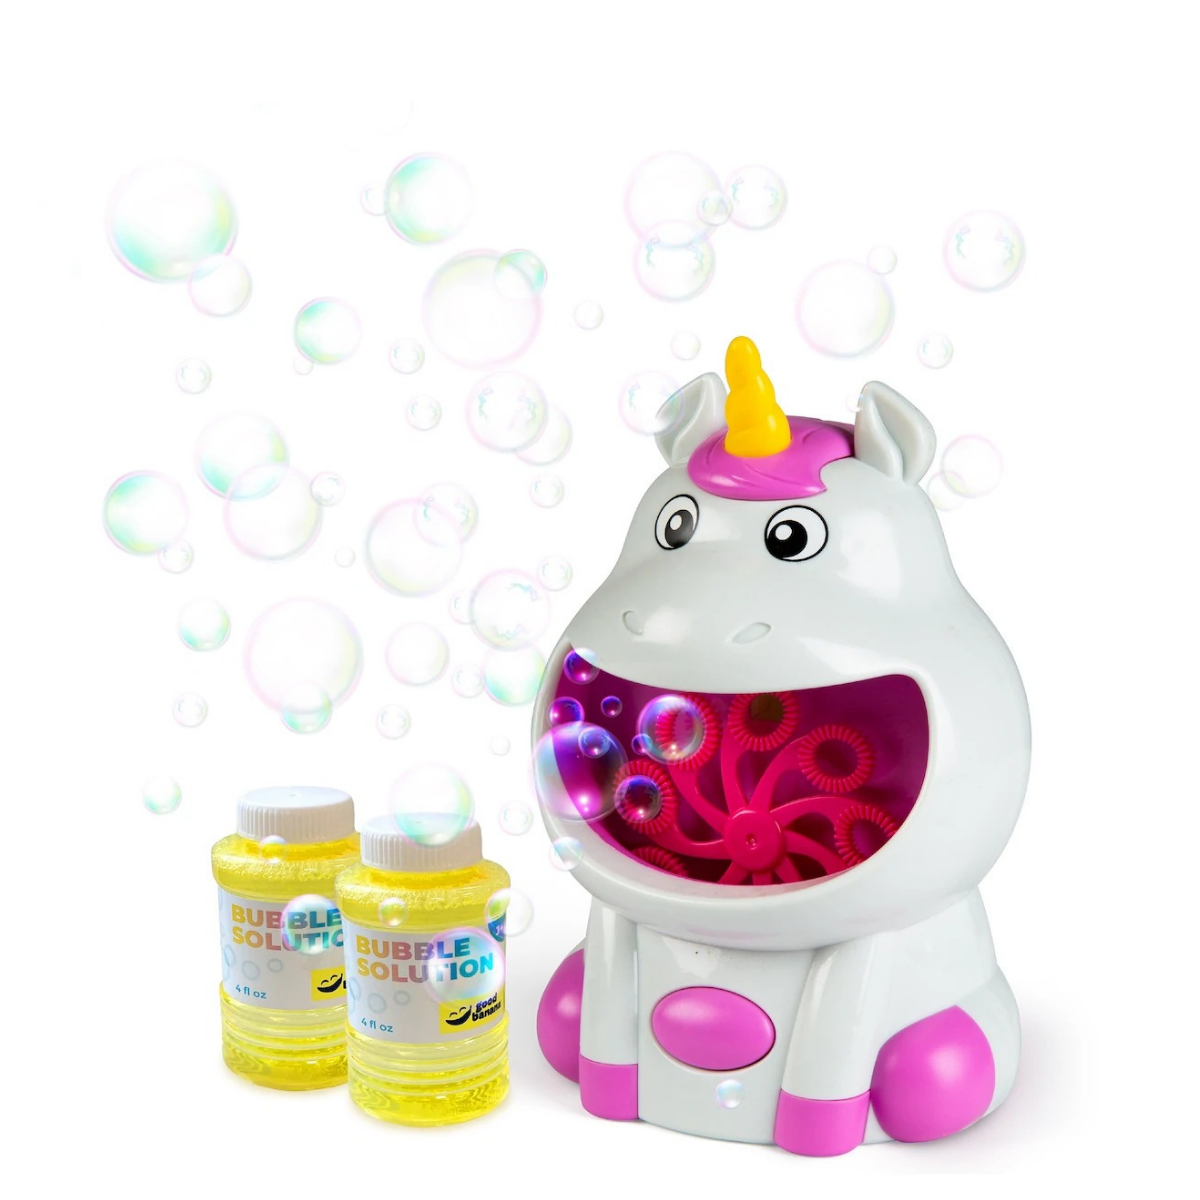 <p>When it comes to sensory toys, bubbles are a surefire win. This will save mom and dad from expending all their energy blowing for minutes on end. Bonus: The bubble formula is pre-mixed and won’t leave the kiddo with sticky hands.</p> <p><em>P.S.: This is a</em> <a href="https://www.glamour.com/about/quick-shop?mbid=synd_msn_rss&utm_source=msn&utm_medium=syndication"><em>Quick Shop</em></a> <em>product—you don’t have to leave</em> Glamour <em>to buy it.</em></p> $25, Maisonette. <a href="https://glamour.com/gallery/best-gifts-for-one-year-olds?bonsai=product_ckv8djk4x05z81spbb9kf8bif&bonsaiRedirect=https%253A%252F%252Fglamour.com%252Fgallery%252Fbest-gifts-for-one-year-olds&bonsaiType=links&isExternal=true">Get it now!</a>